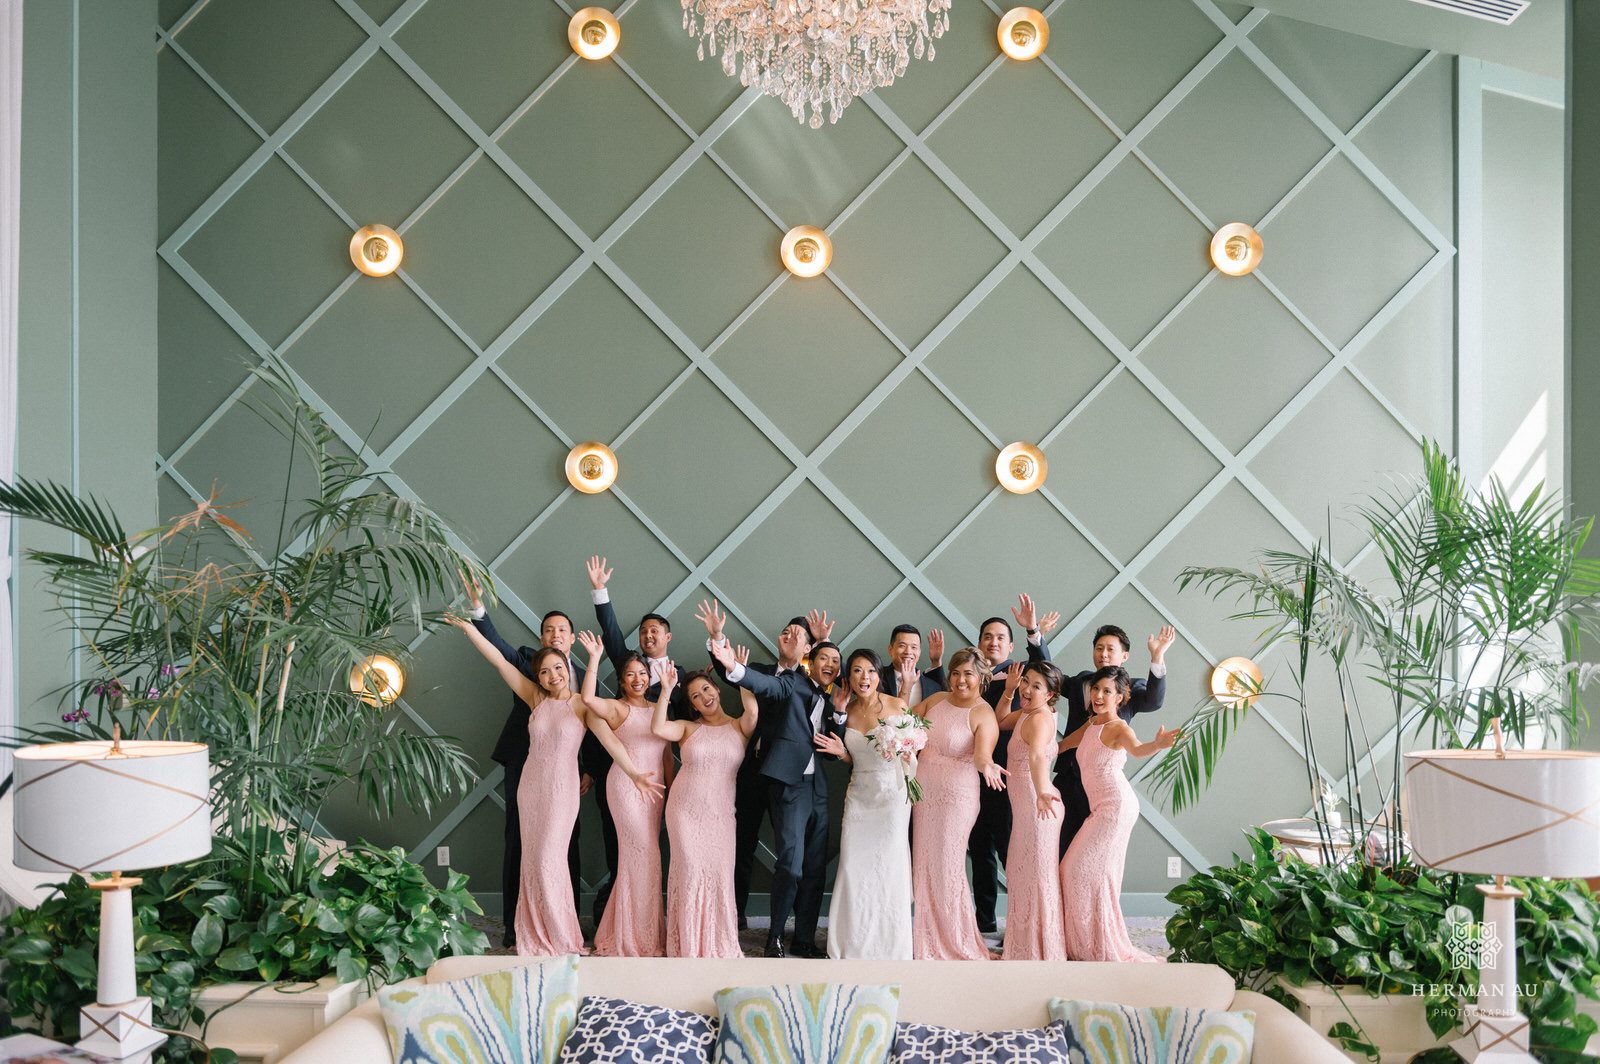 The entire bridal party acting goofy